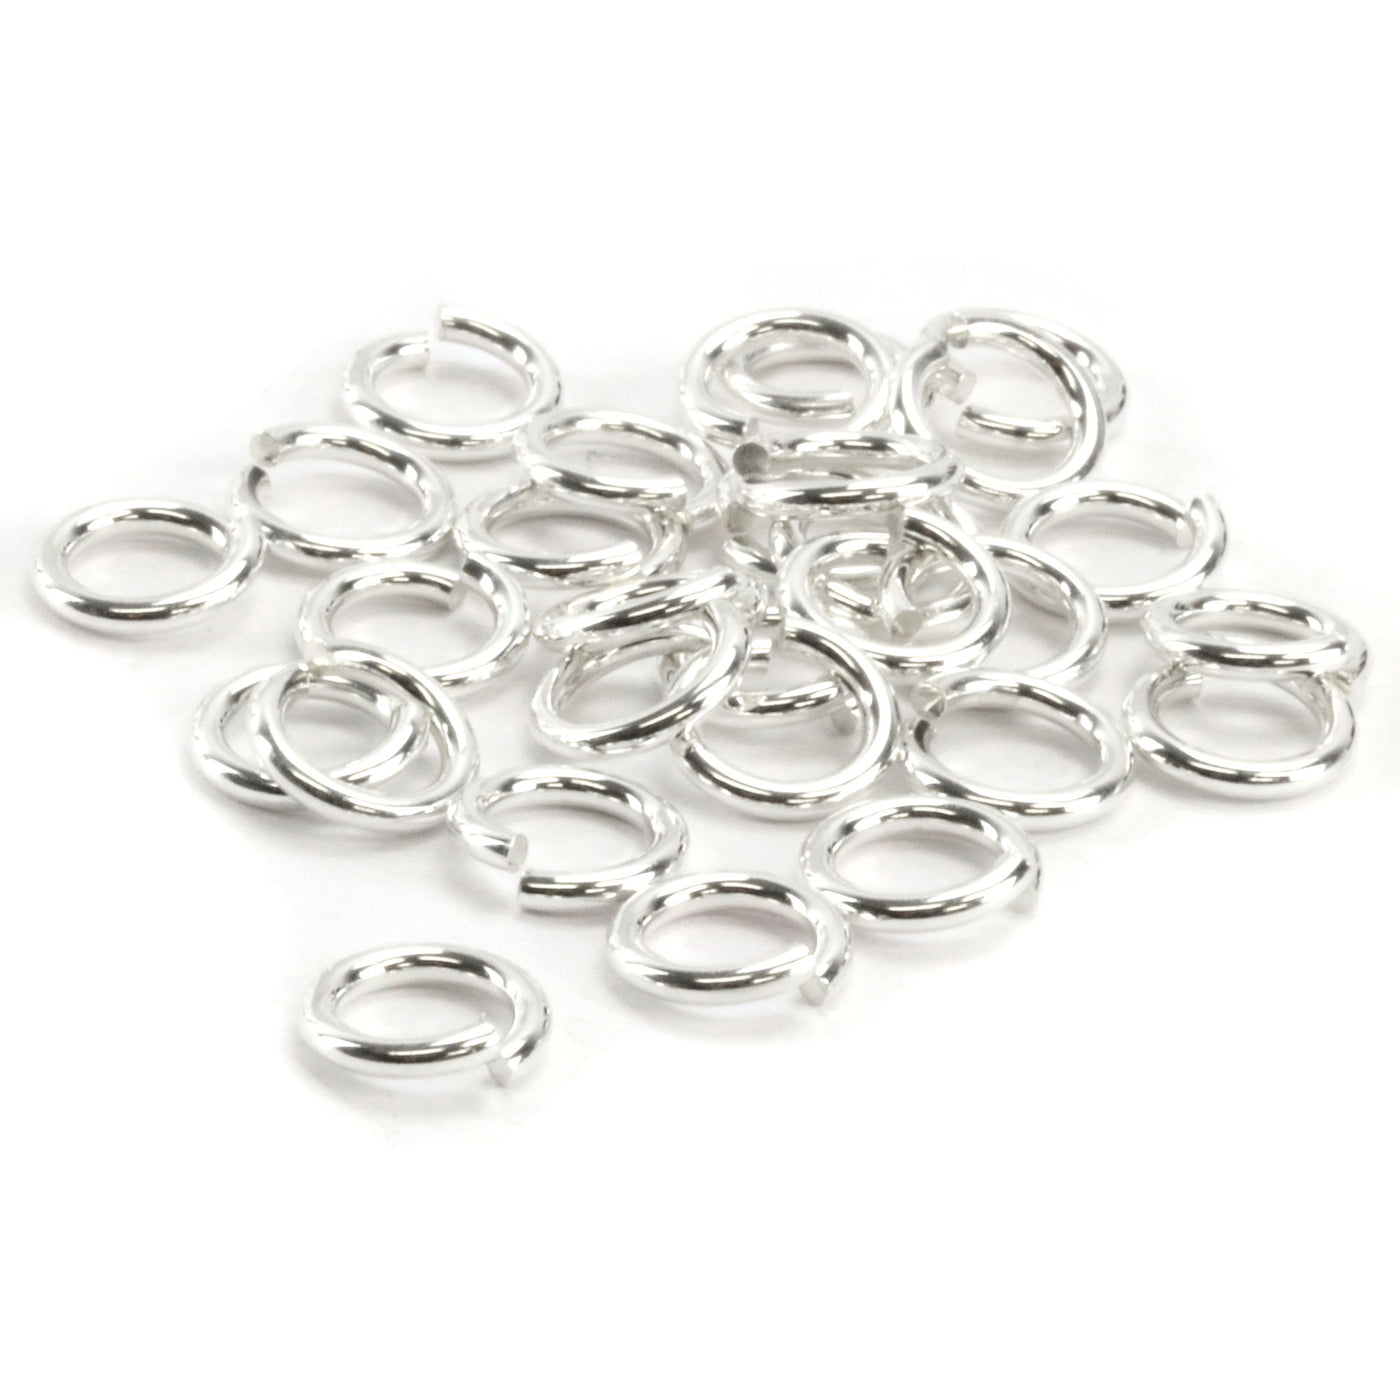 Sterling Silver JUMP RINGS. 6mm. Packet of 10.